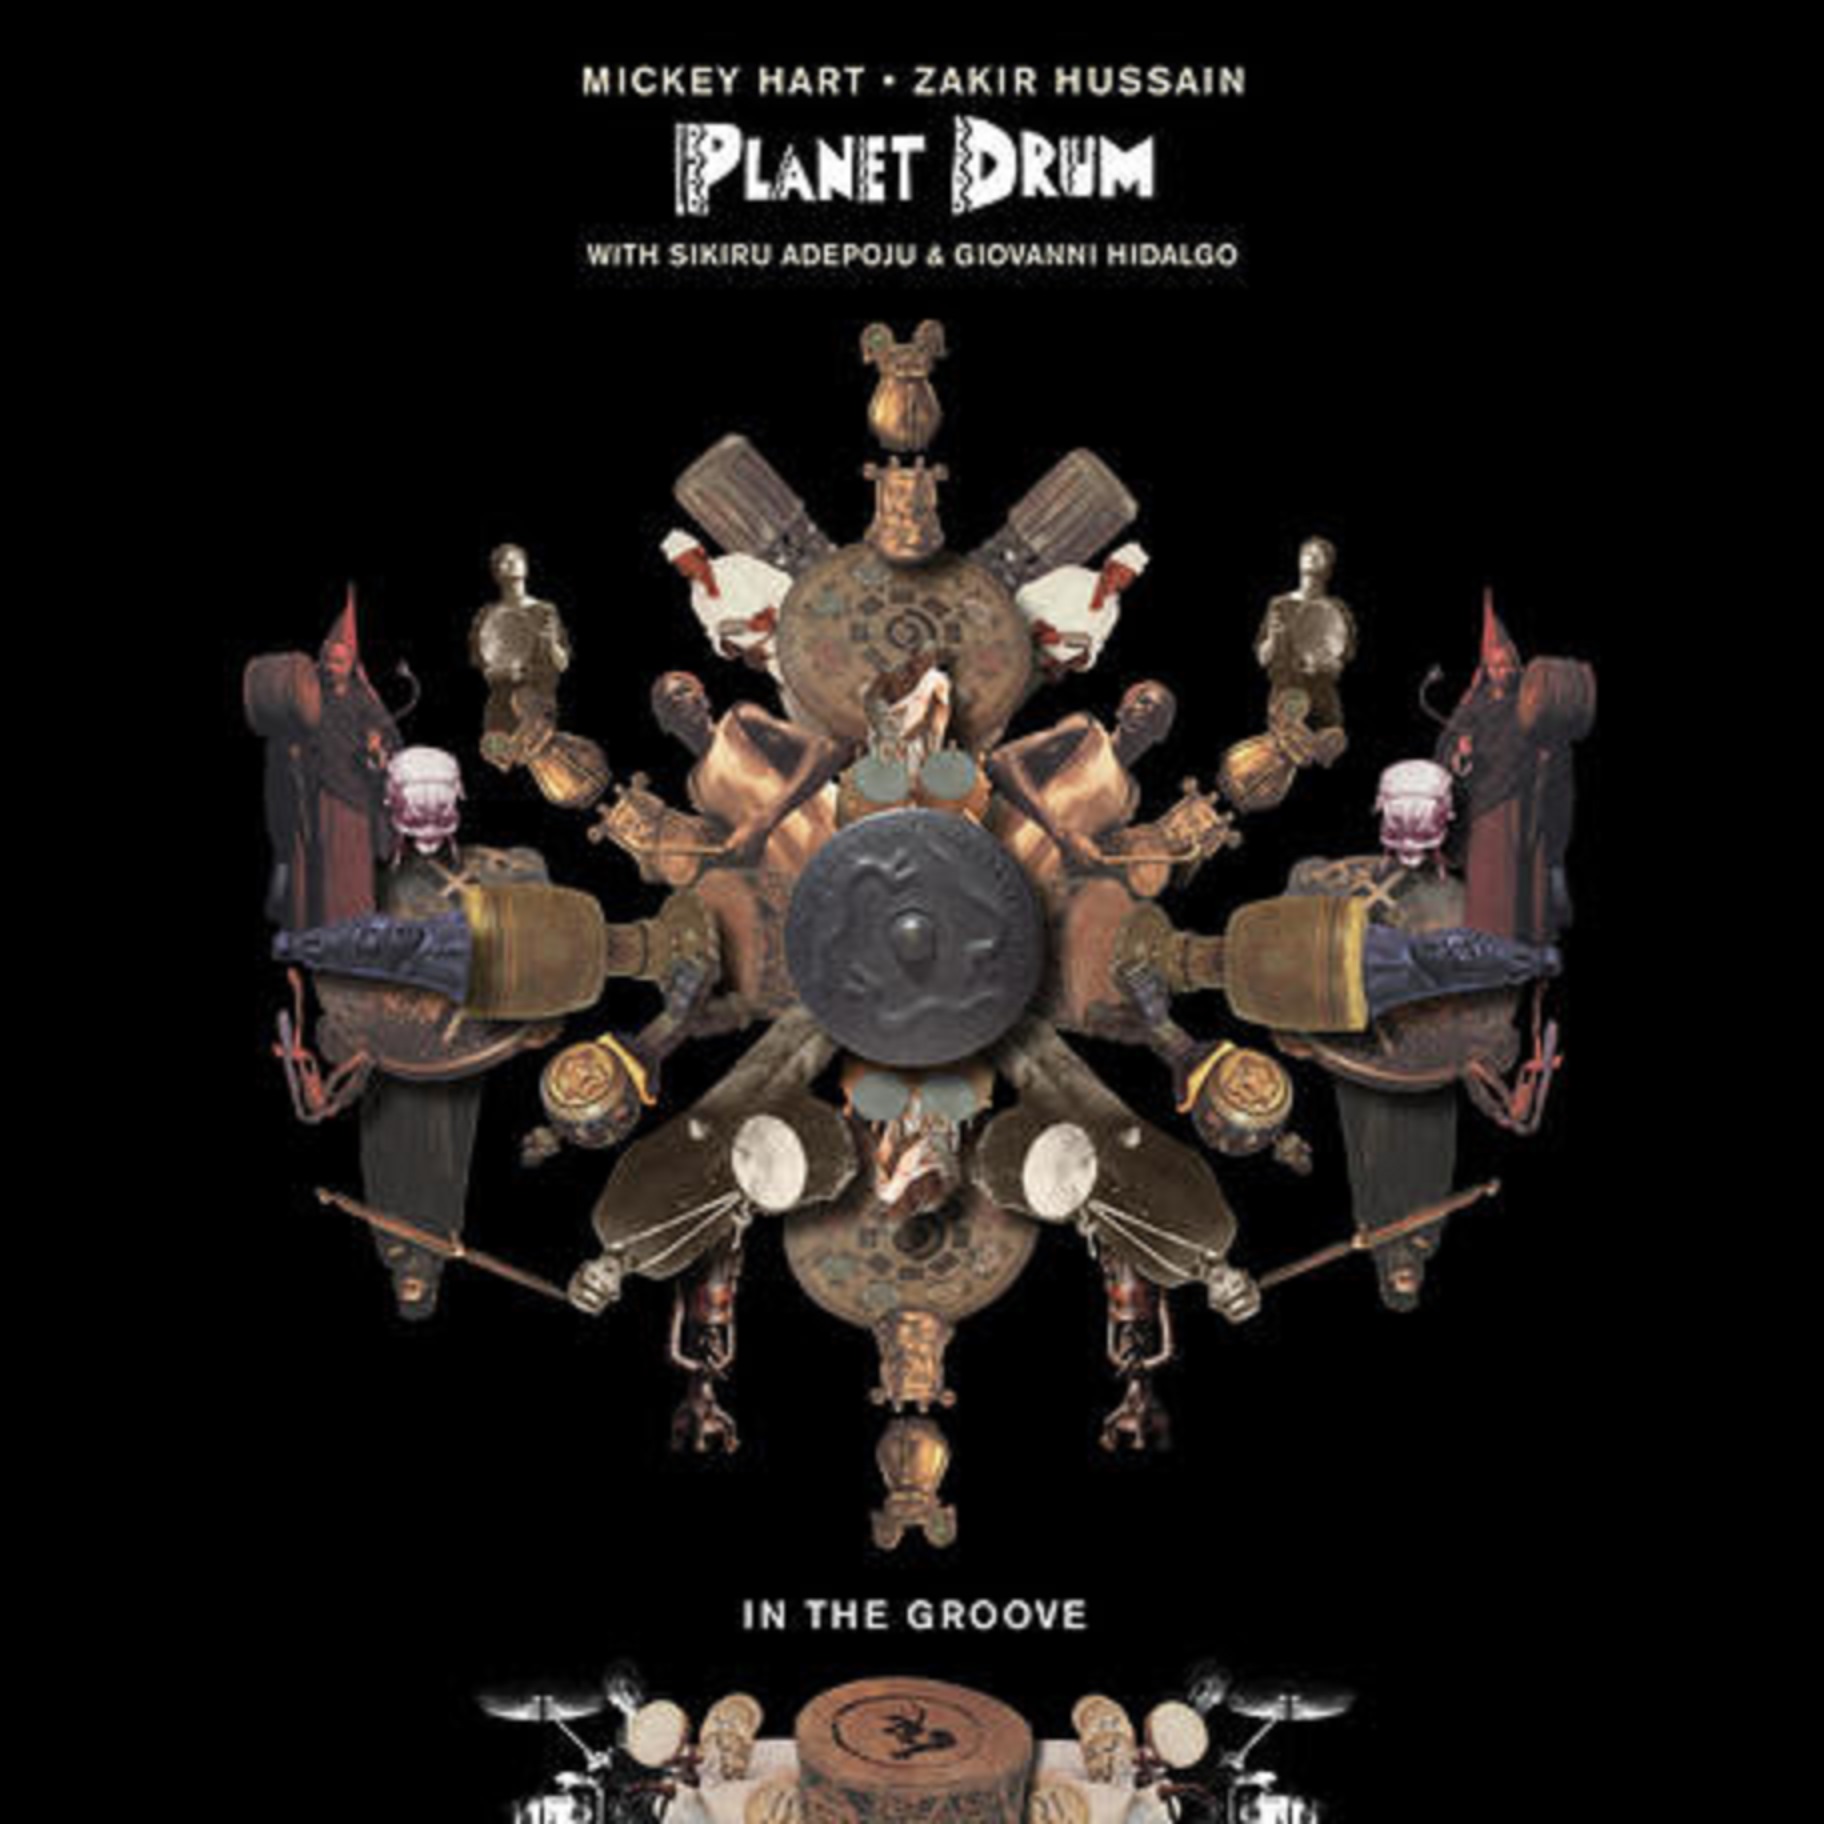 After 15 Years Groundbreaking Global Percussion Ensemble PLANET DRUM Announces IN THE GROOVE, New Album out August 5th